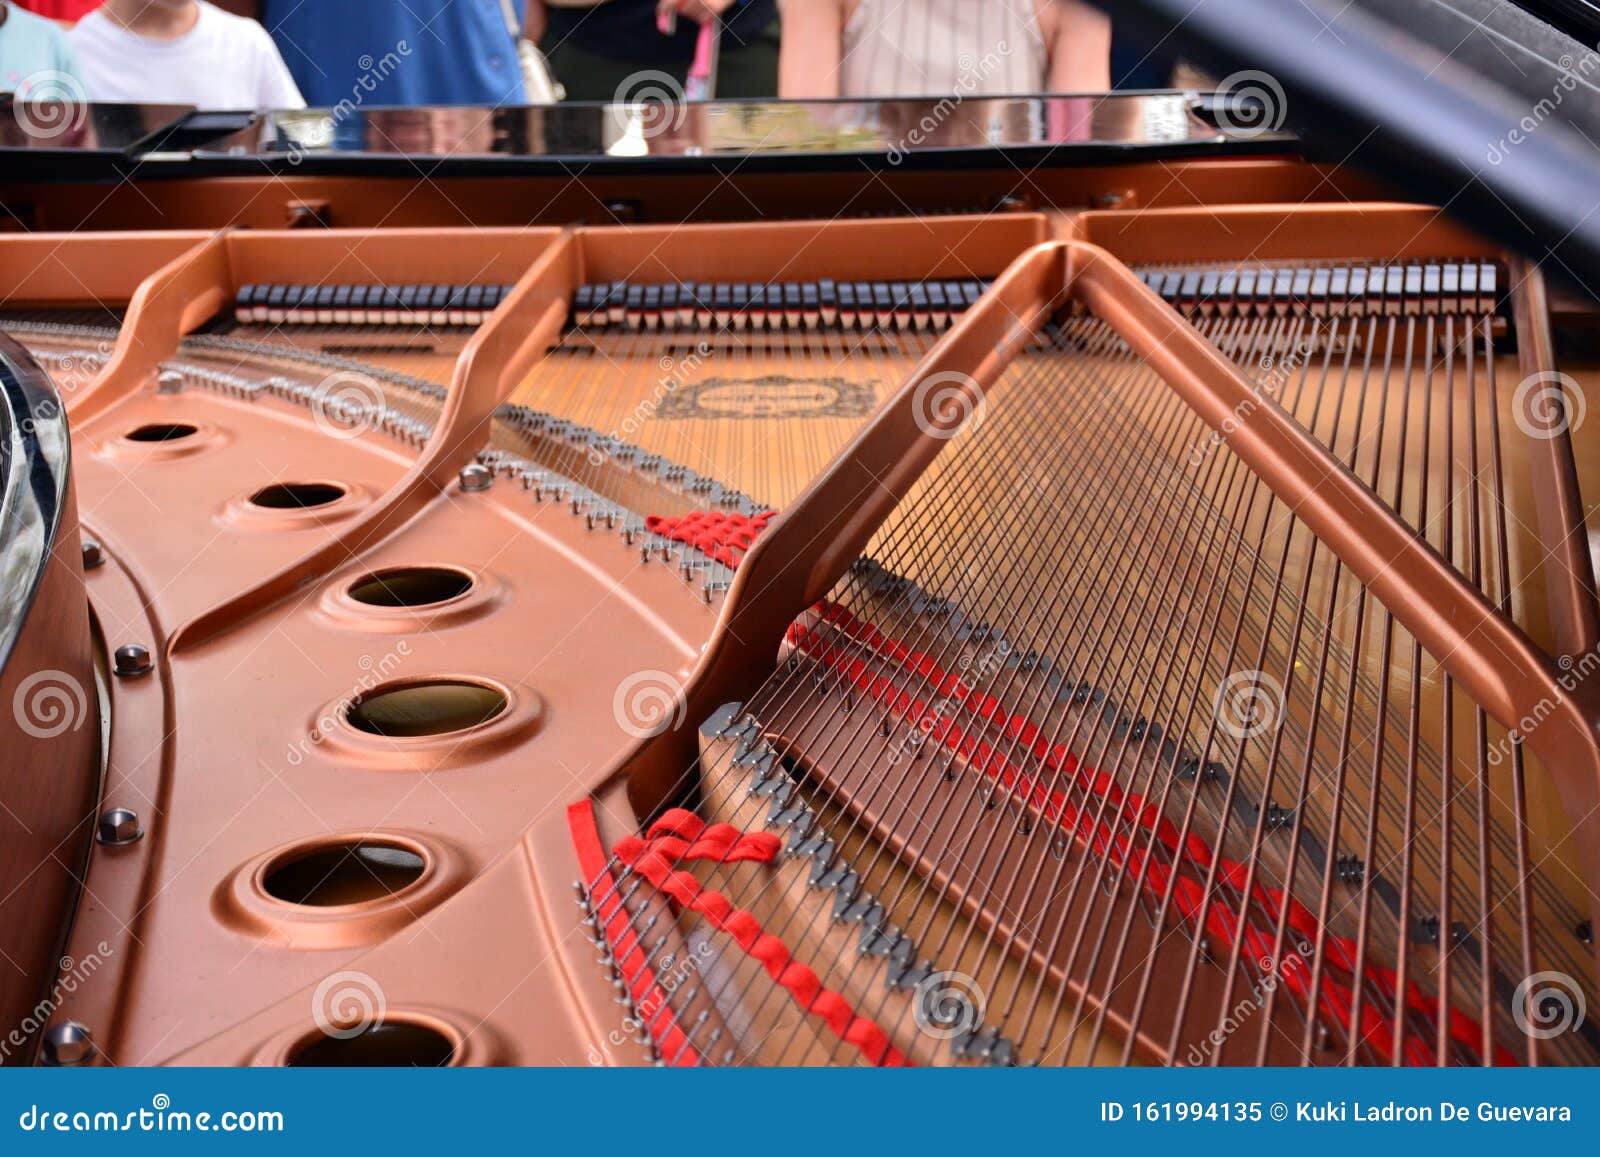 compenents inside a grand piano